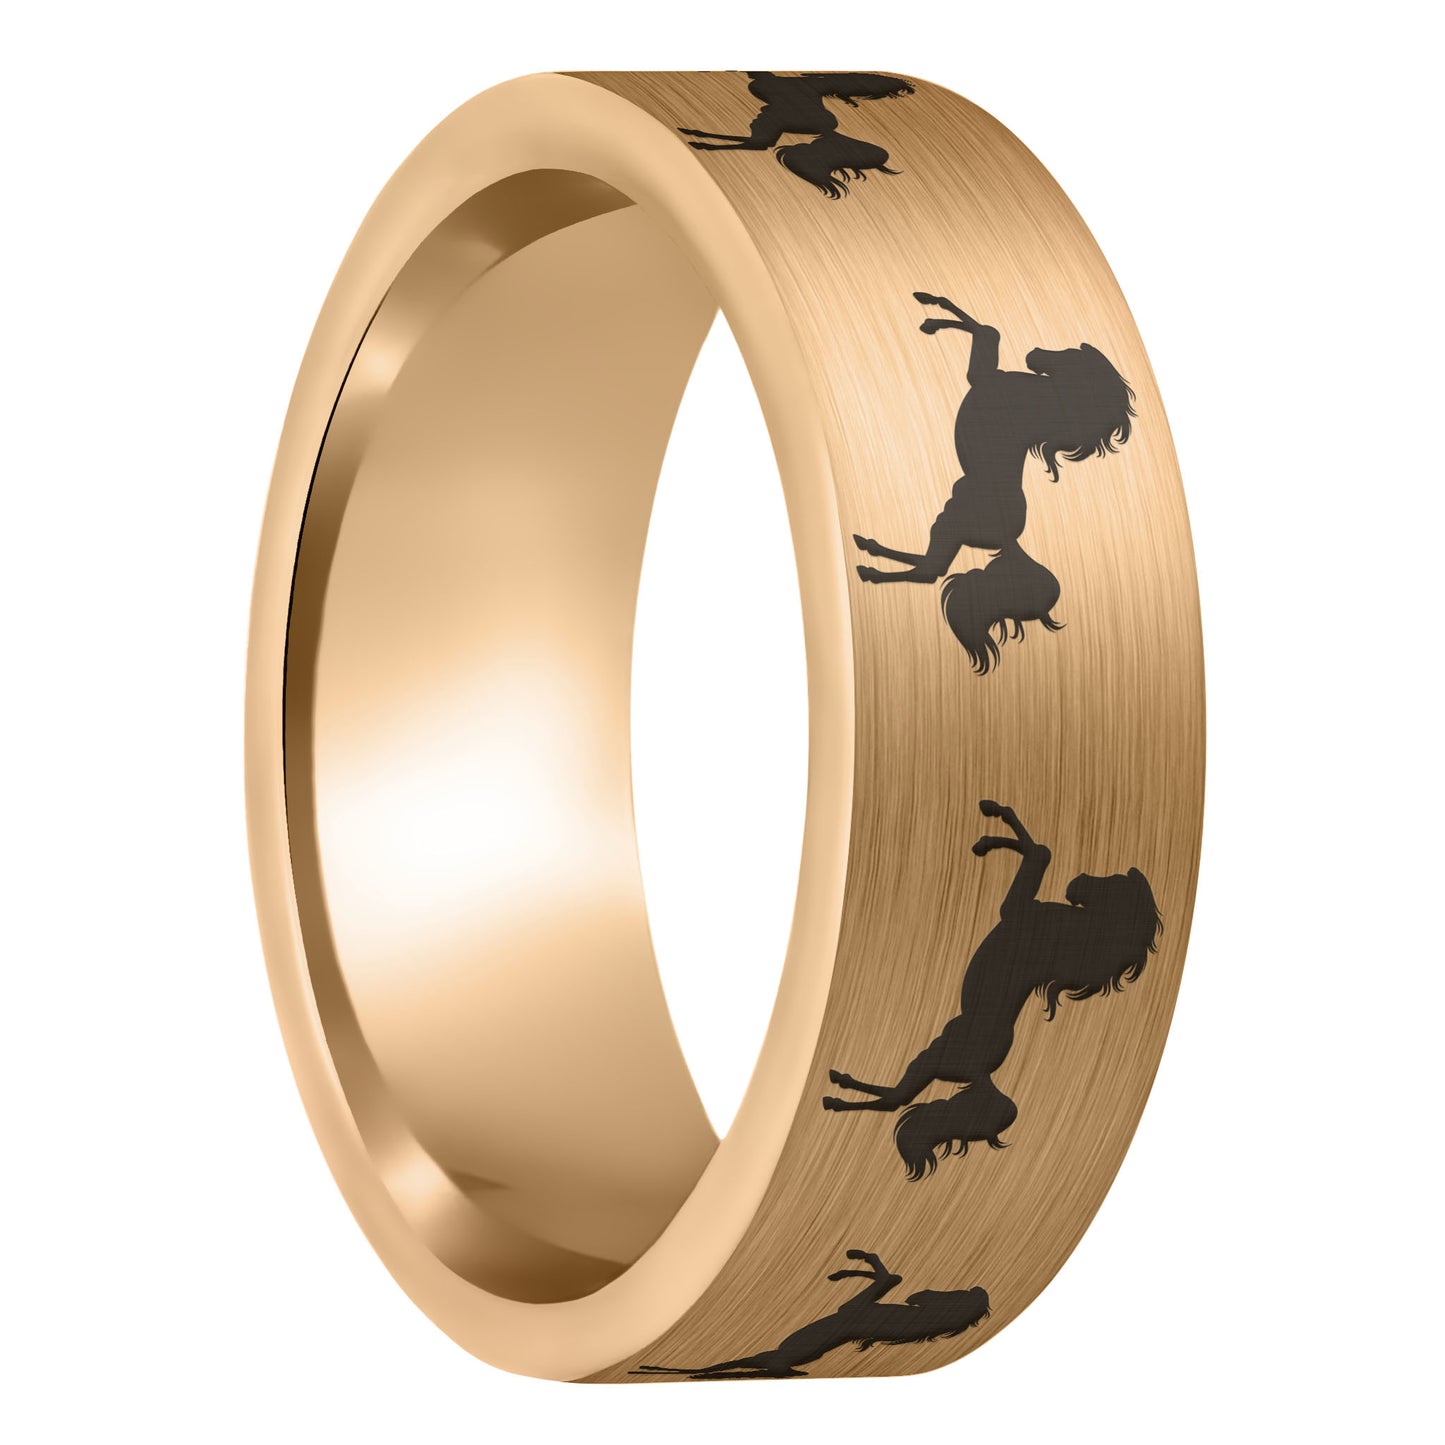 A rearing horse brushed rose gold tungsten men's wedding band displayed on a plain white background.